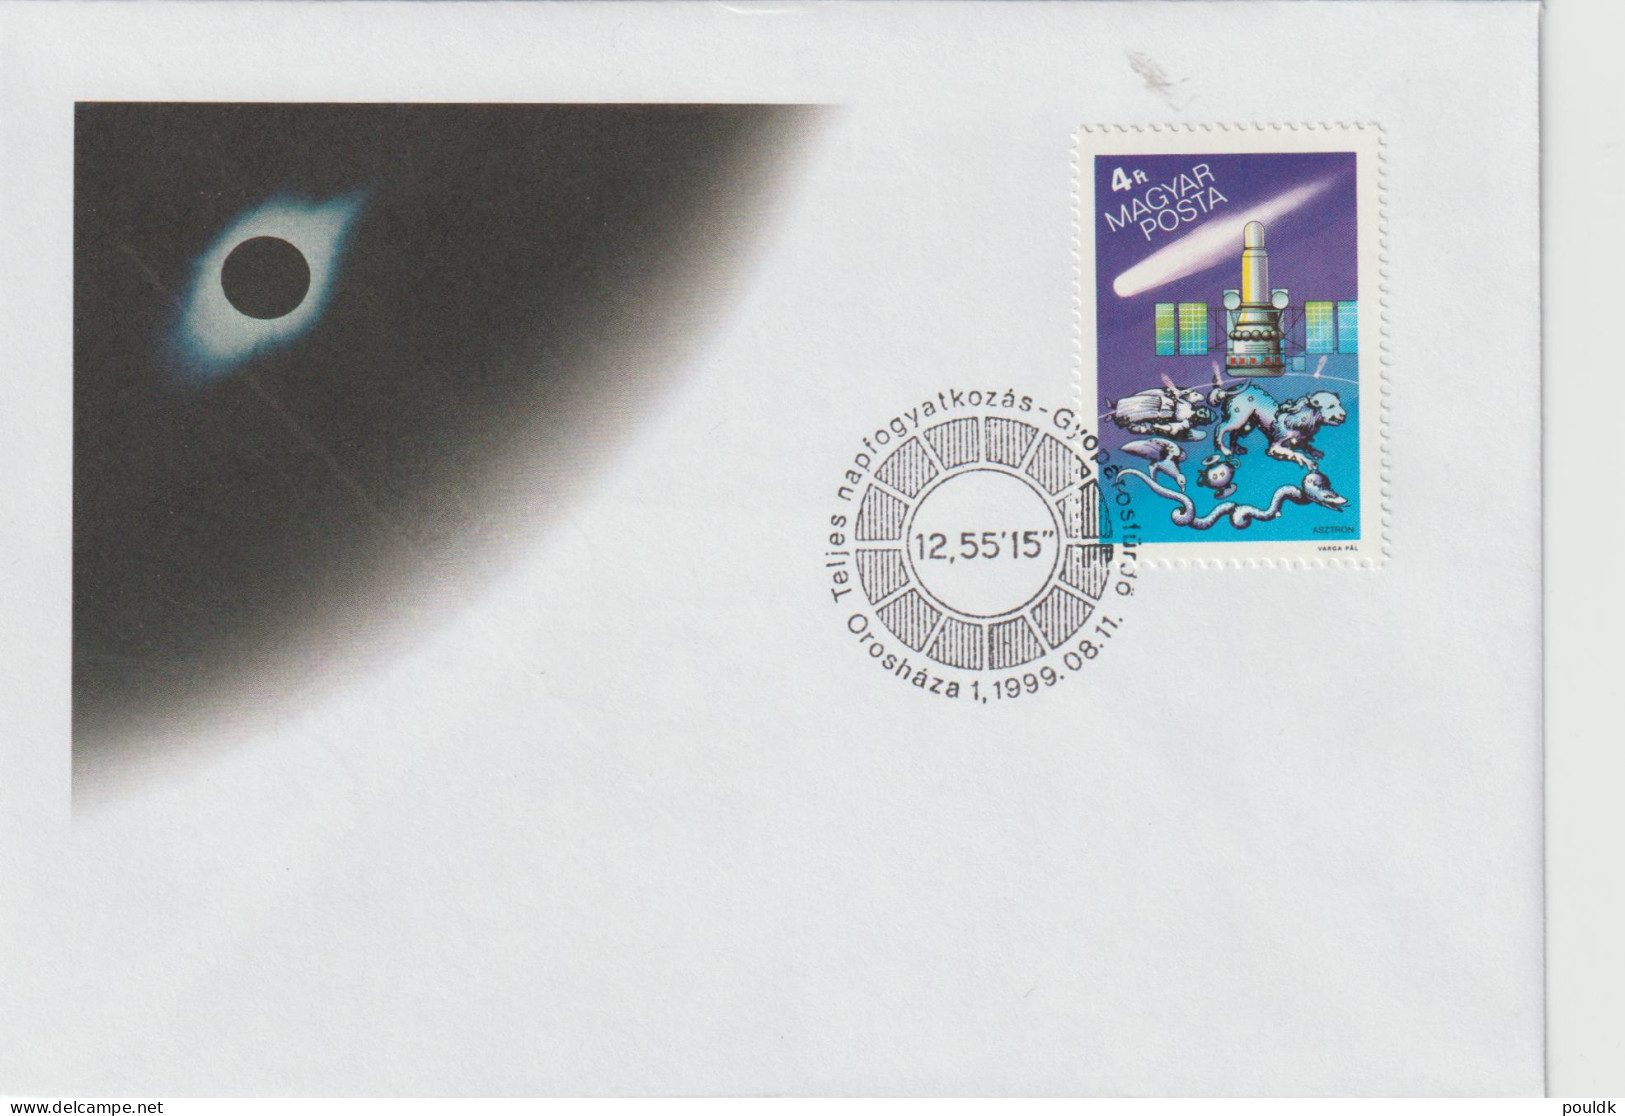 Solar Eclipse 1999 - Commemorative Cover From Hungary 11.8.1999. Postal Weight 0,04 Kg. Please Read Sales Conditions - Naturaleza